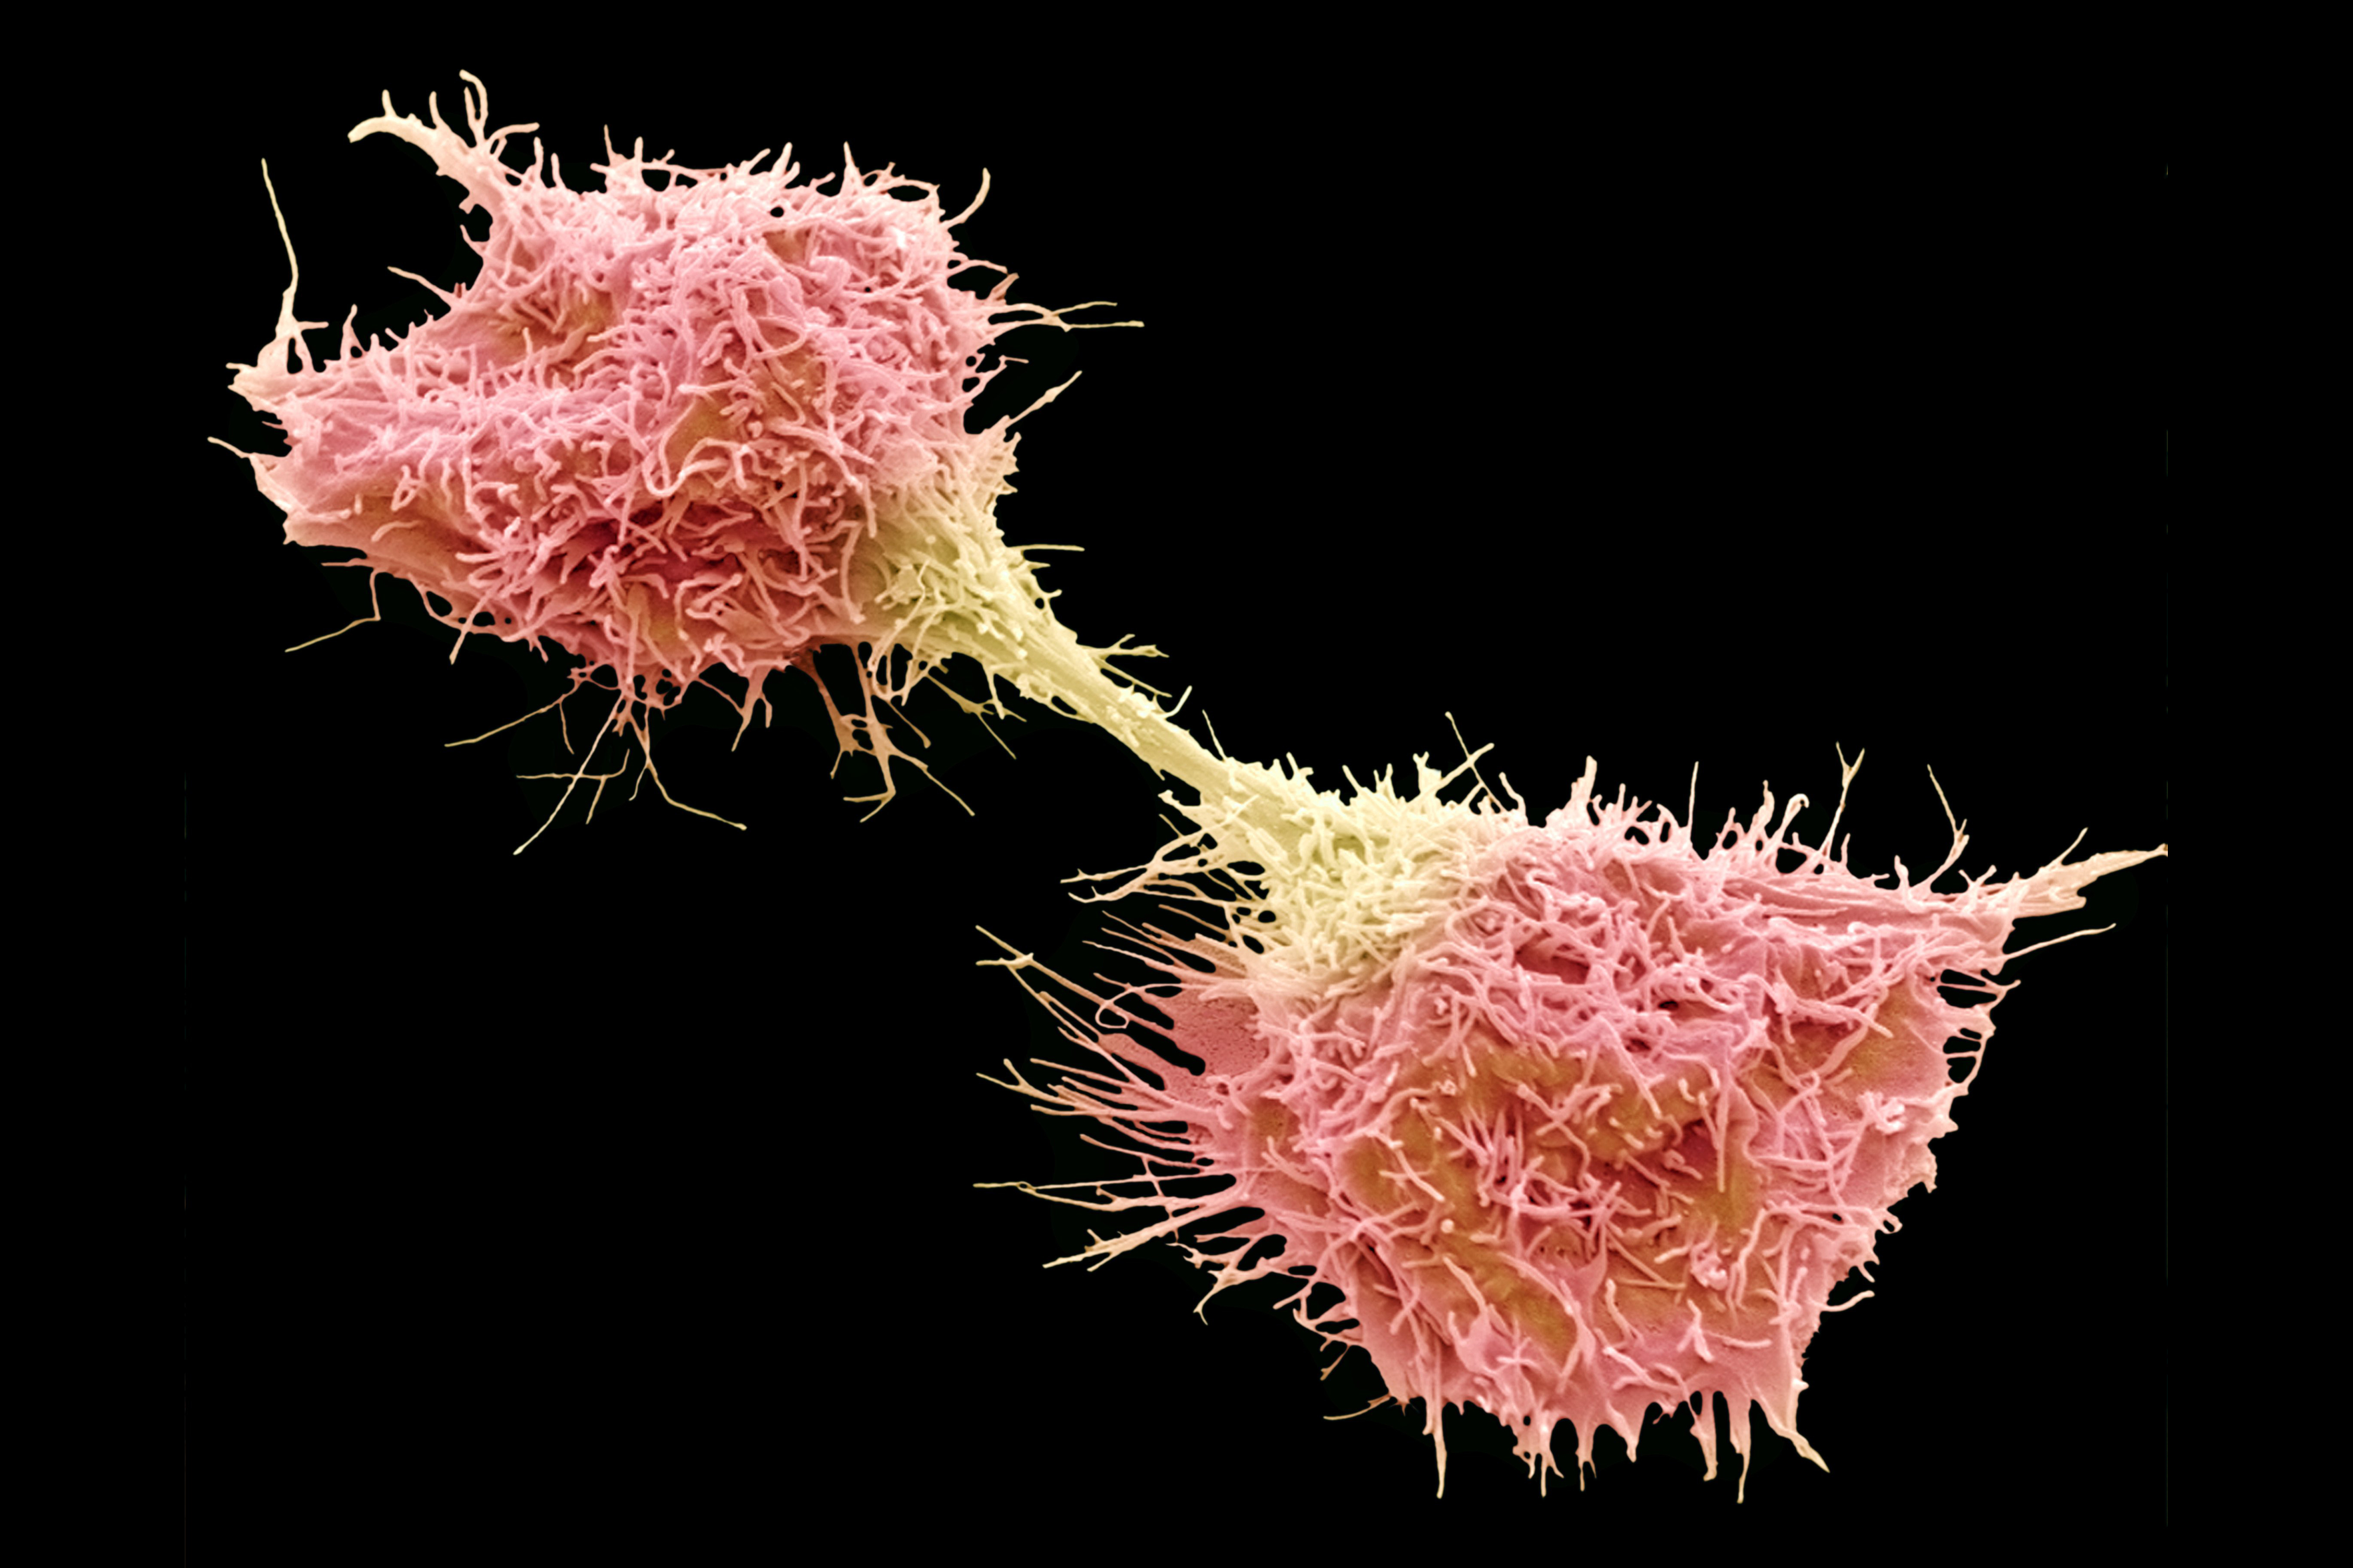 Dividing fibrosarcoma cells. Colored scanning electron micrograph of fibrosarcoma (fibroblastic sarcoma) cells in the late telophase stage of mitosis. The cells are covered in many filopodia. Fibrosarcoma is a malignant tumour derived from fibrous connective tissue of the bone and characterized by immature proliferating fibroblasts or undifferentiated anaplastic spindle cells. (Getty Images)